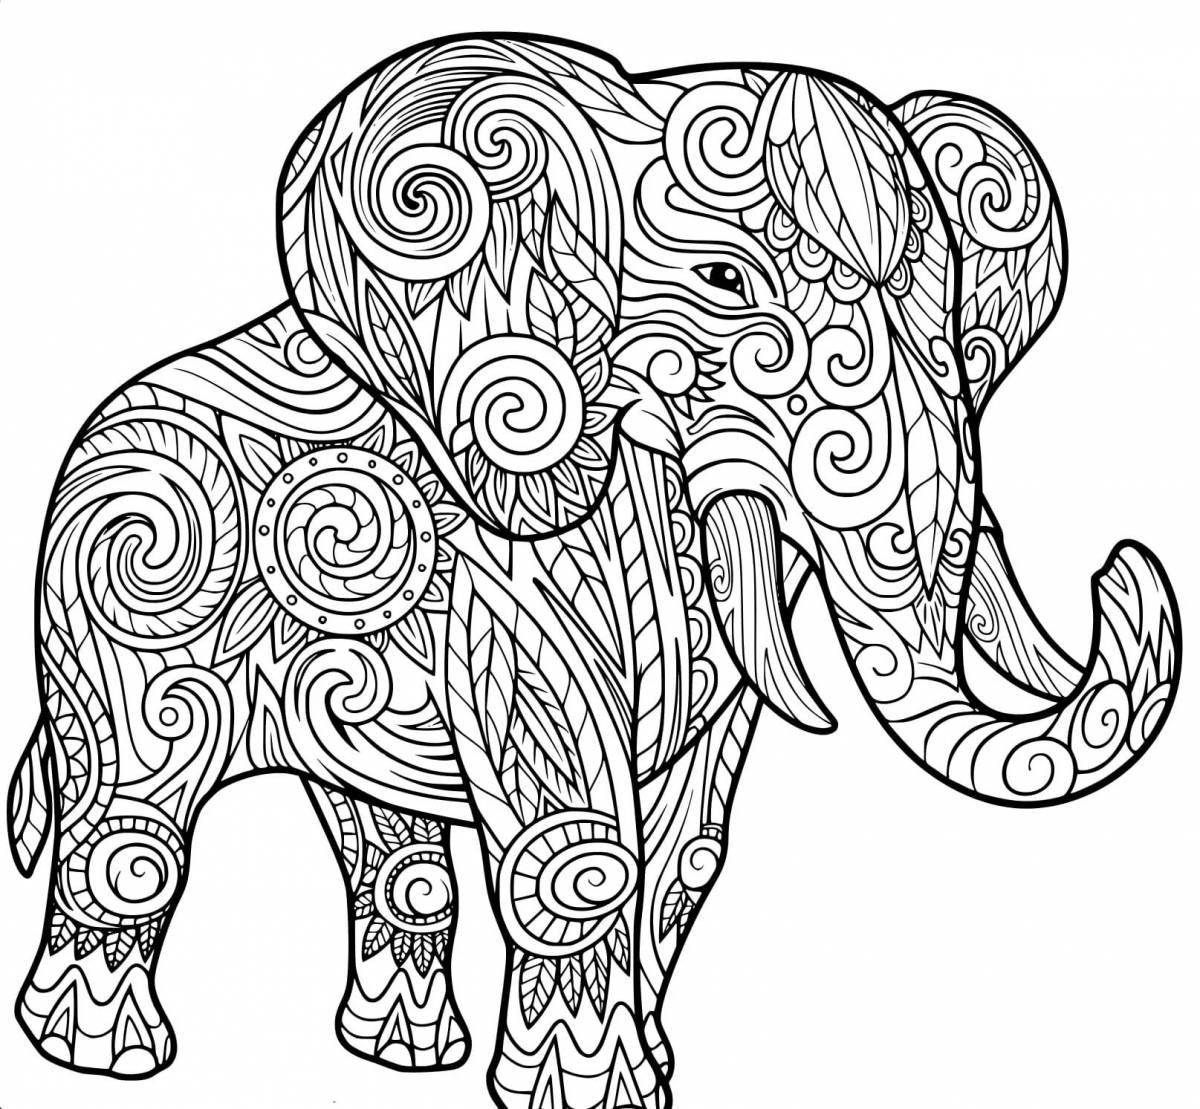 Bright patterned animal coloring